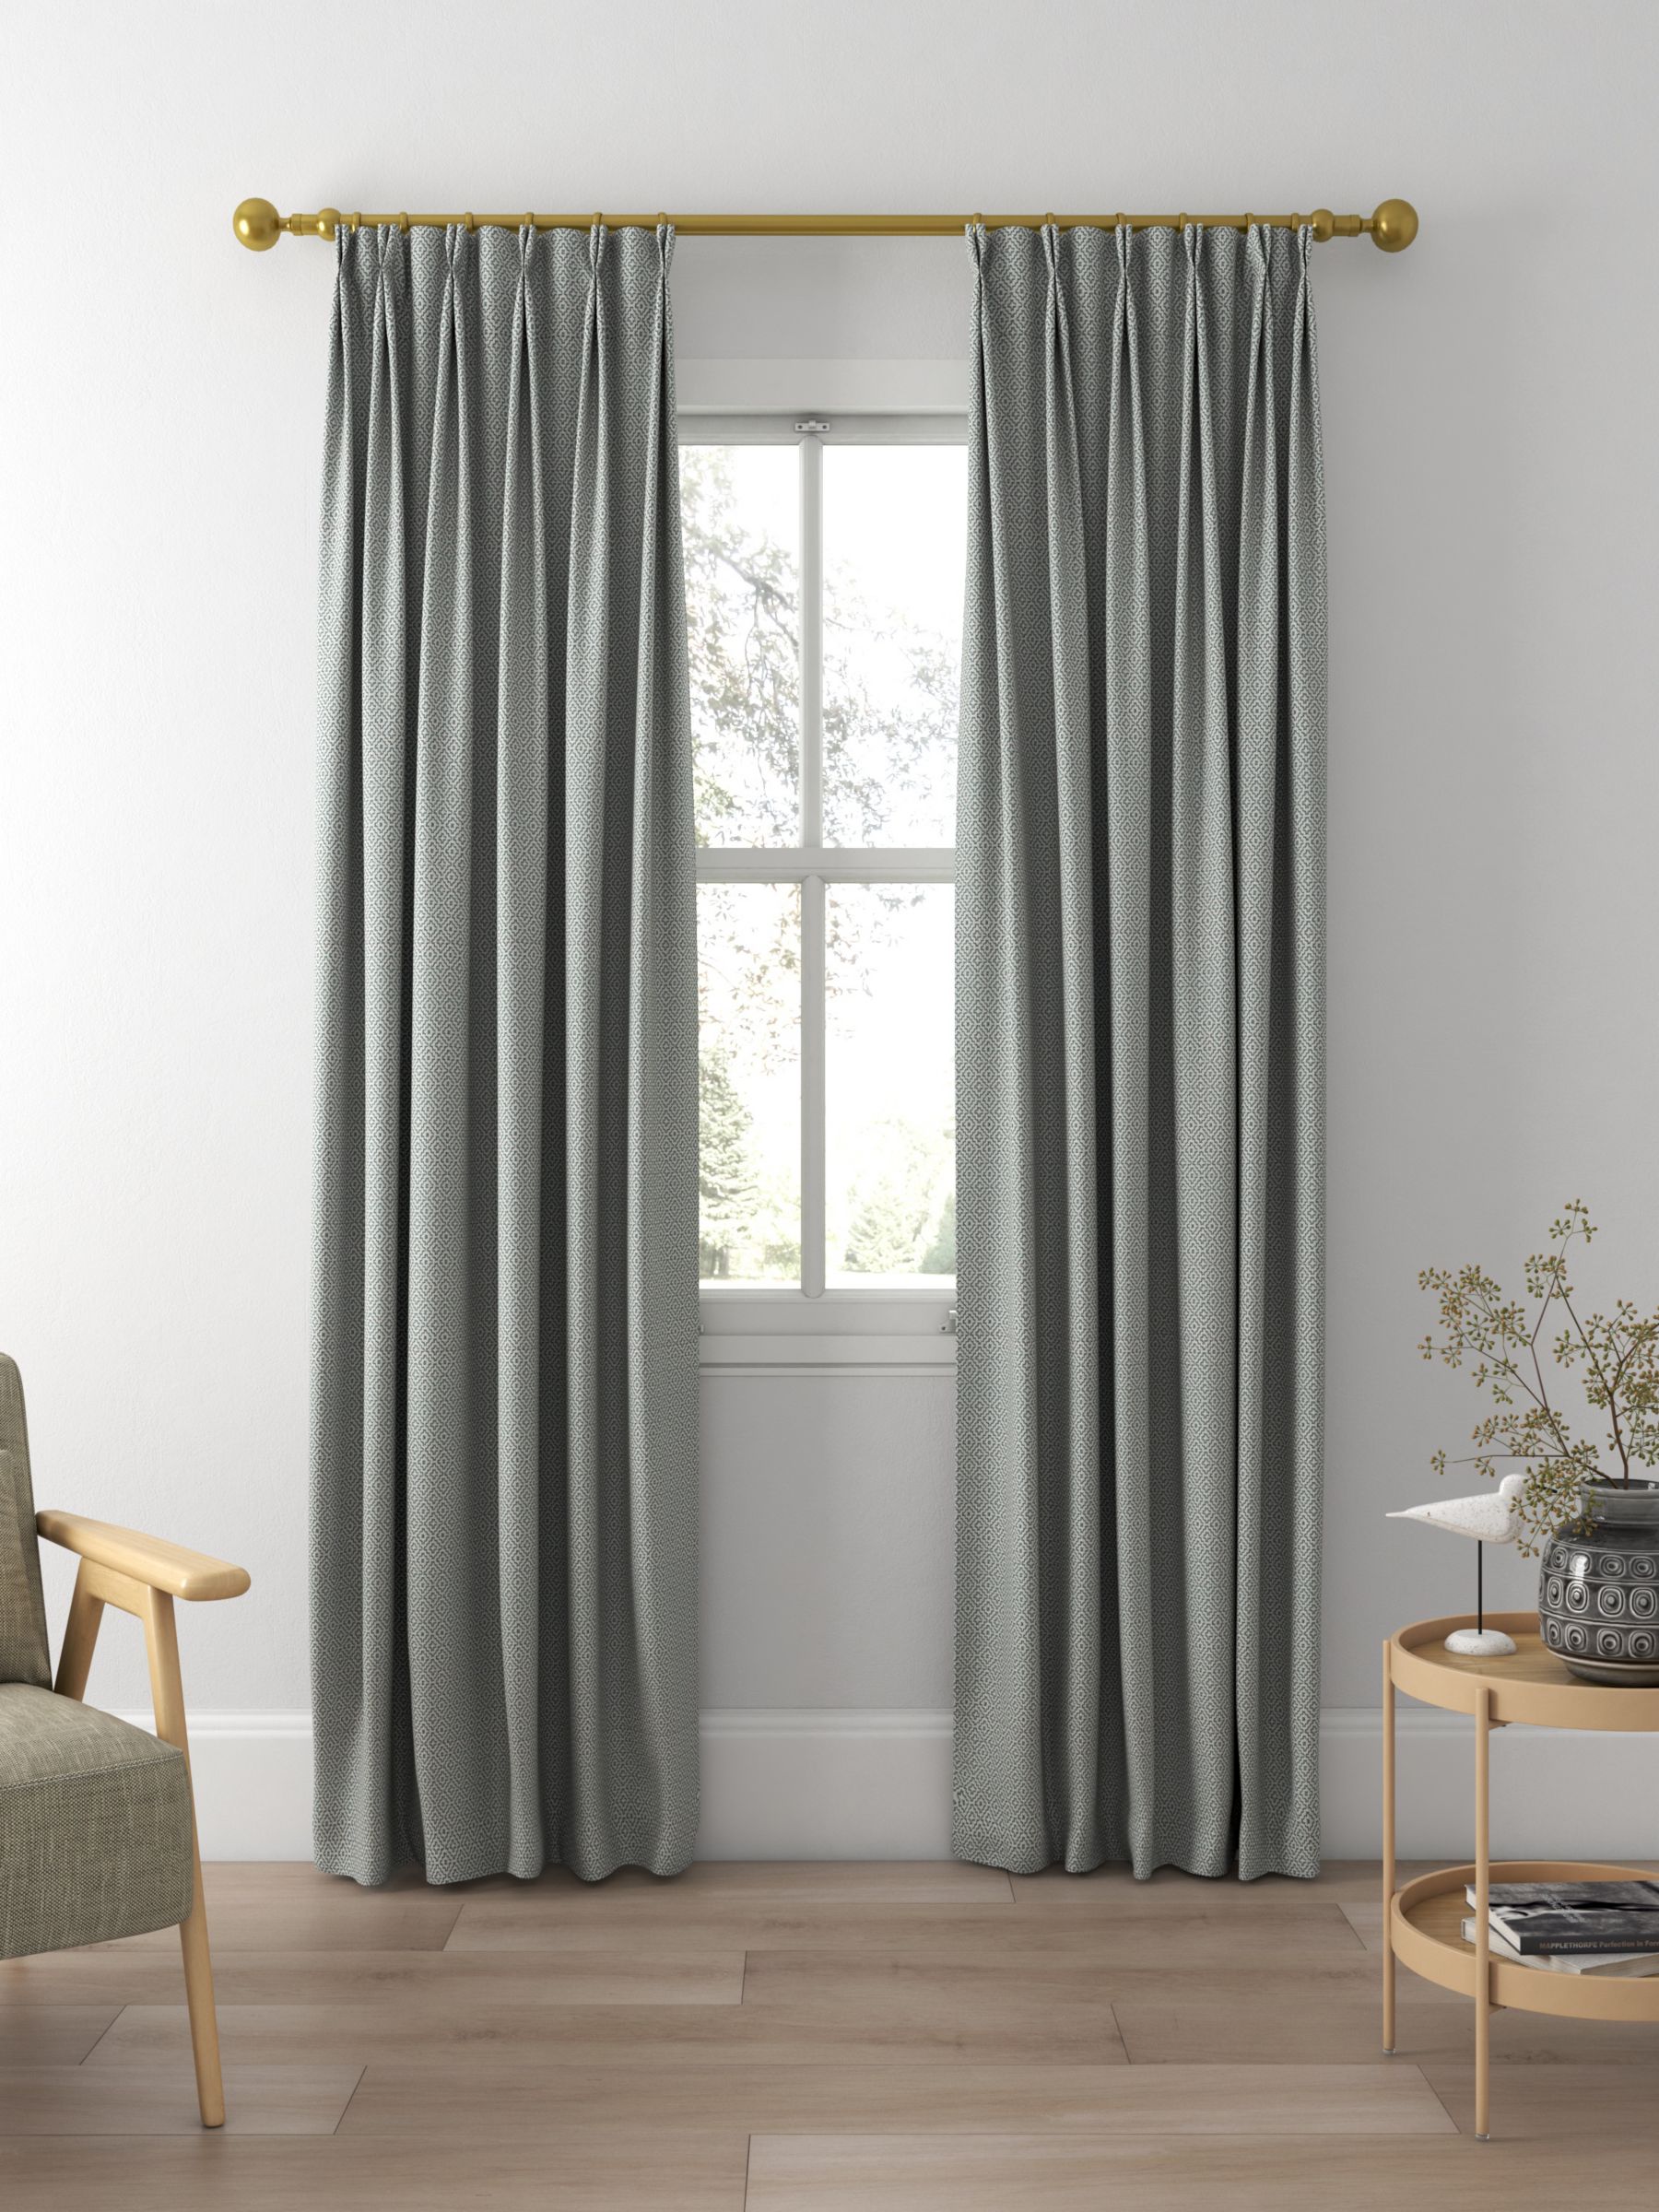 Sanderson Linden Made to Measure Curtains, Teal